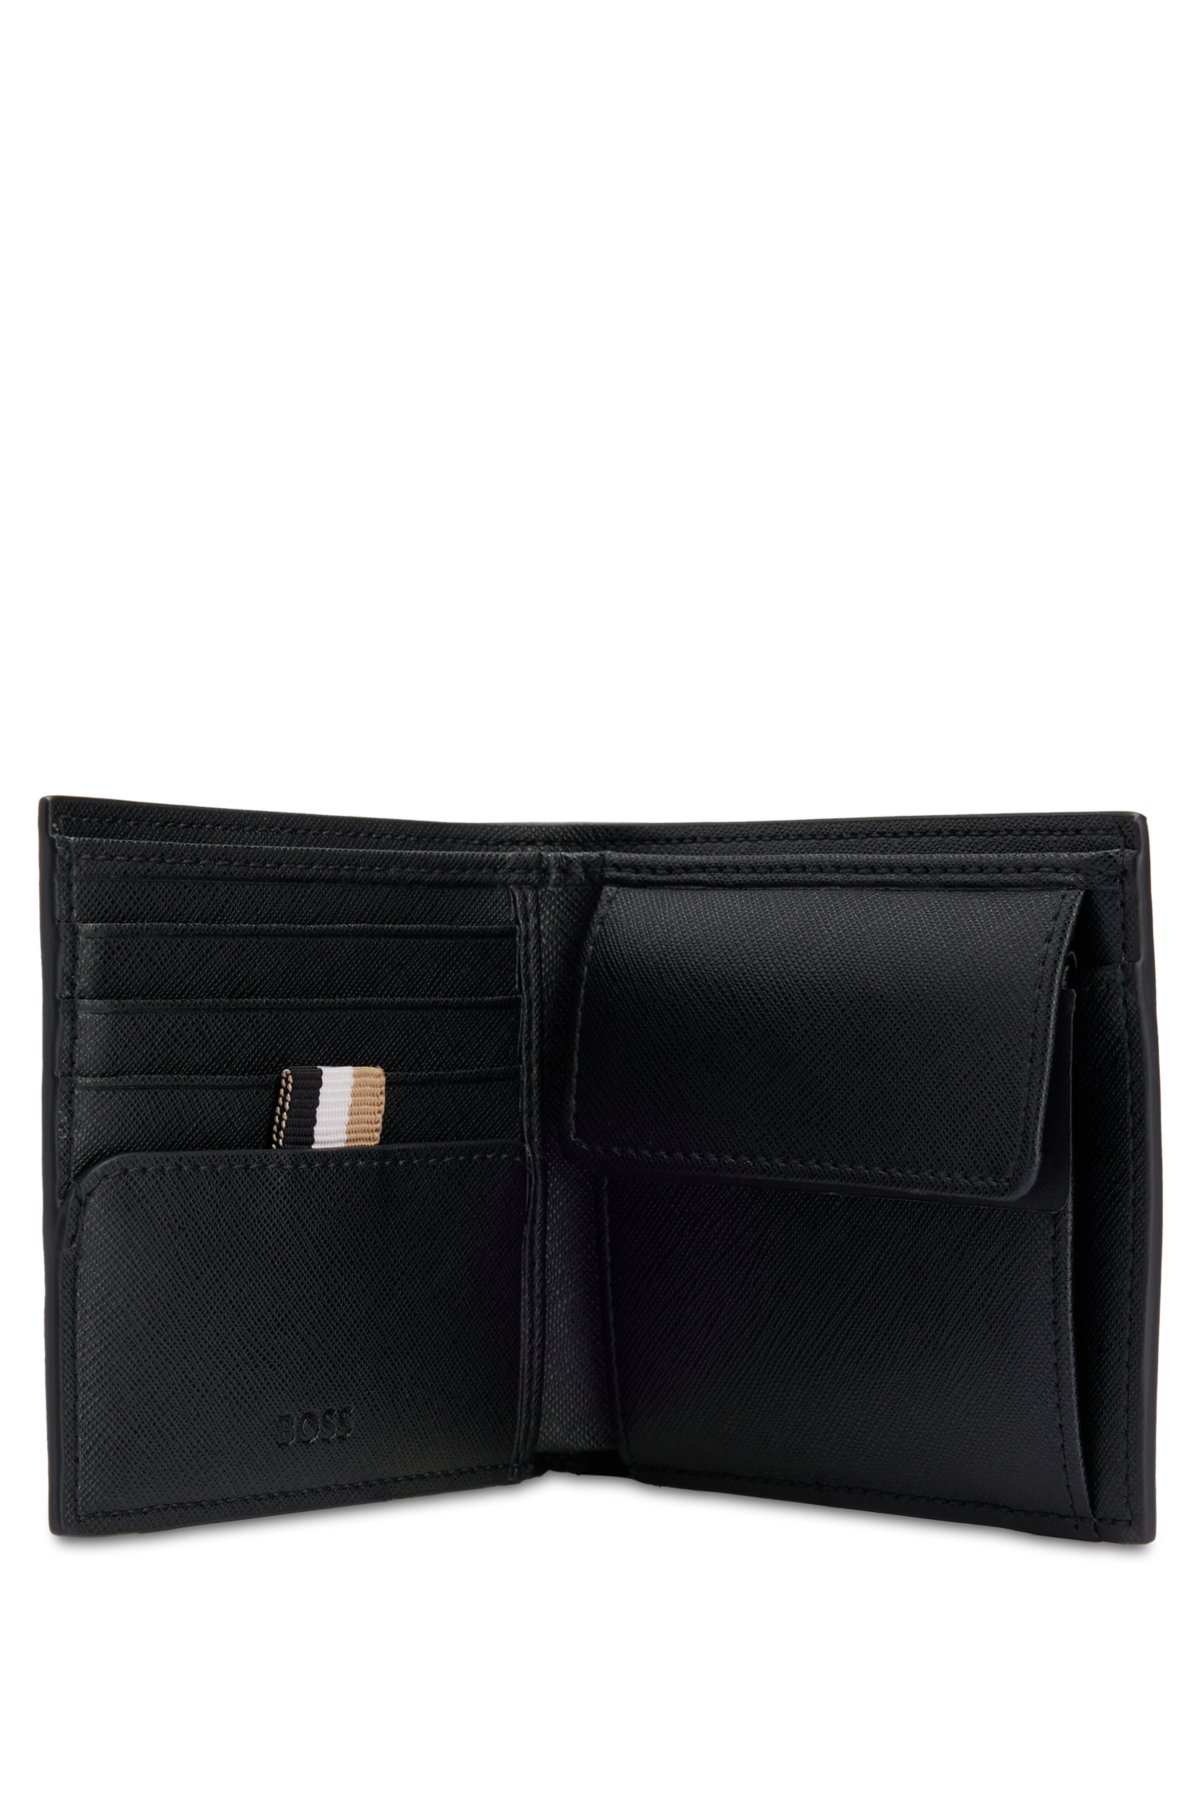 Structured wallet with signature stripe and logo detail, Black